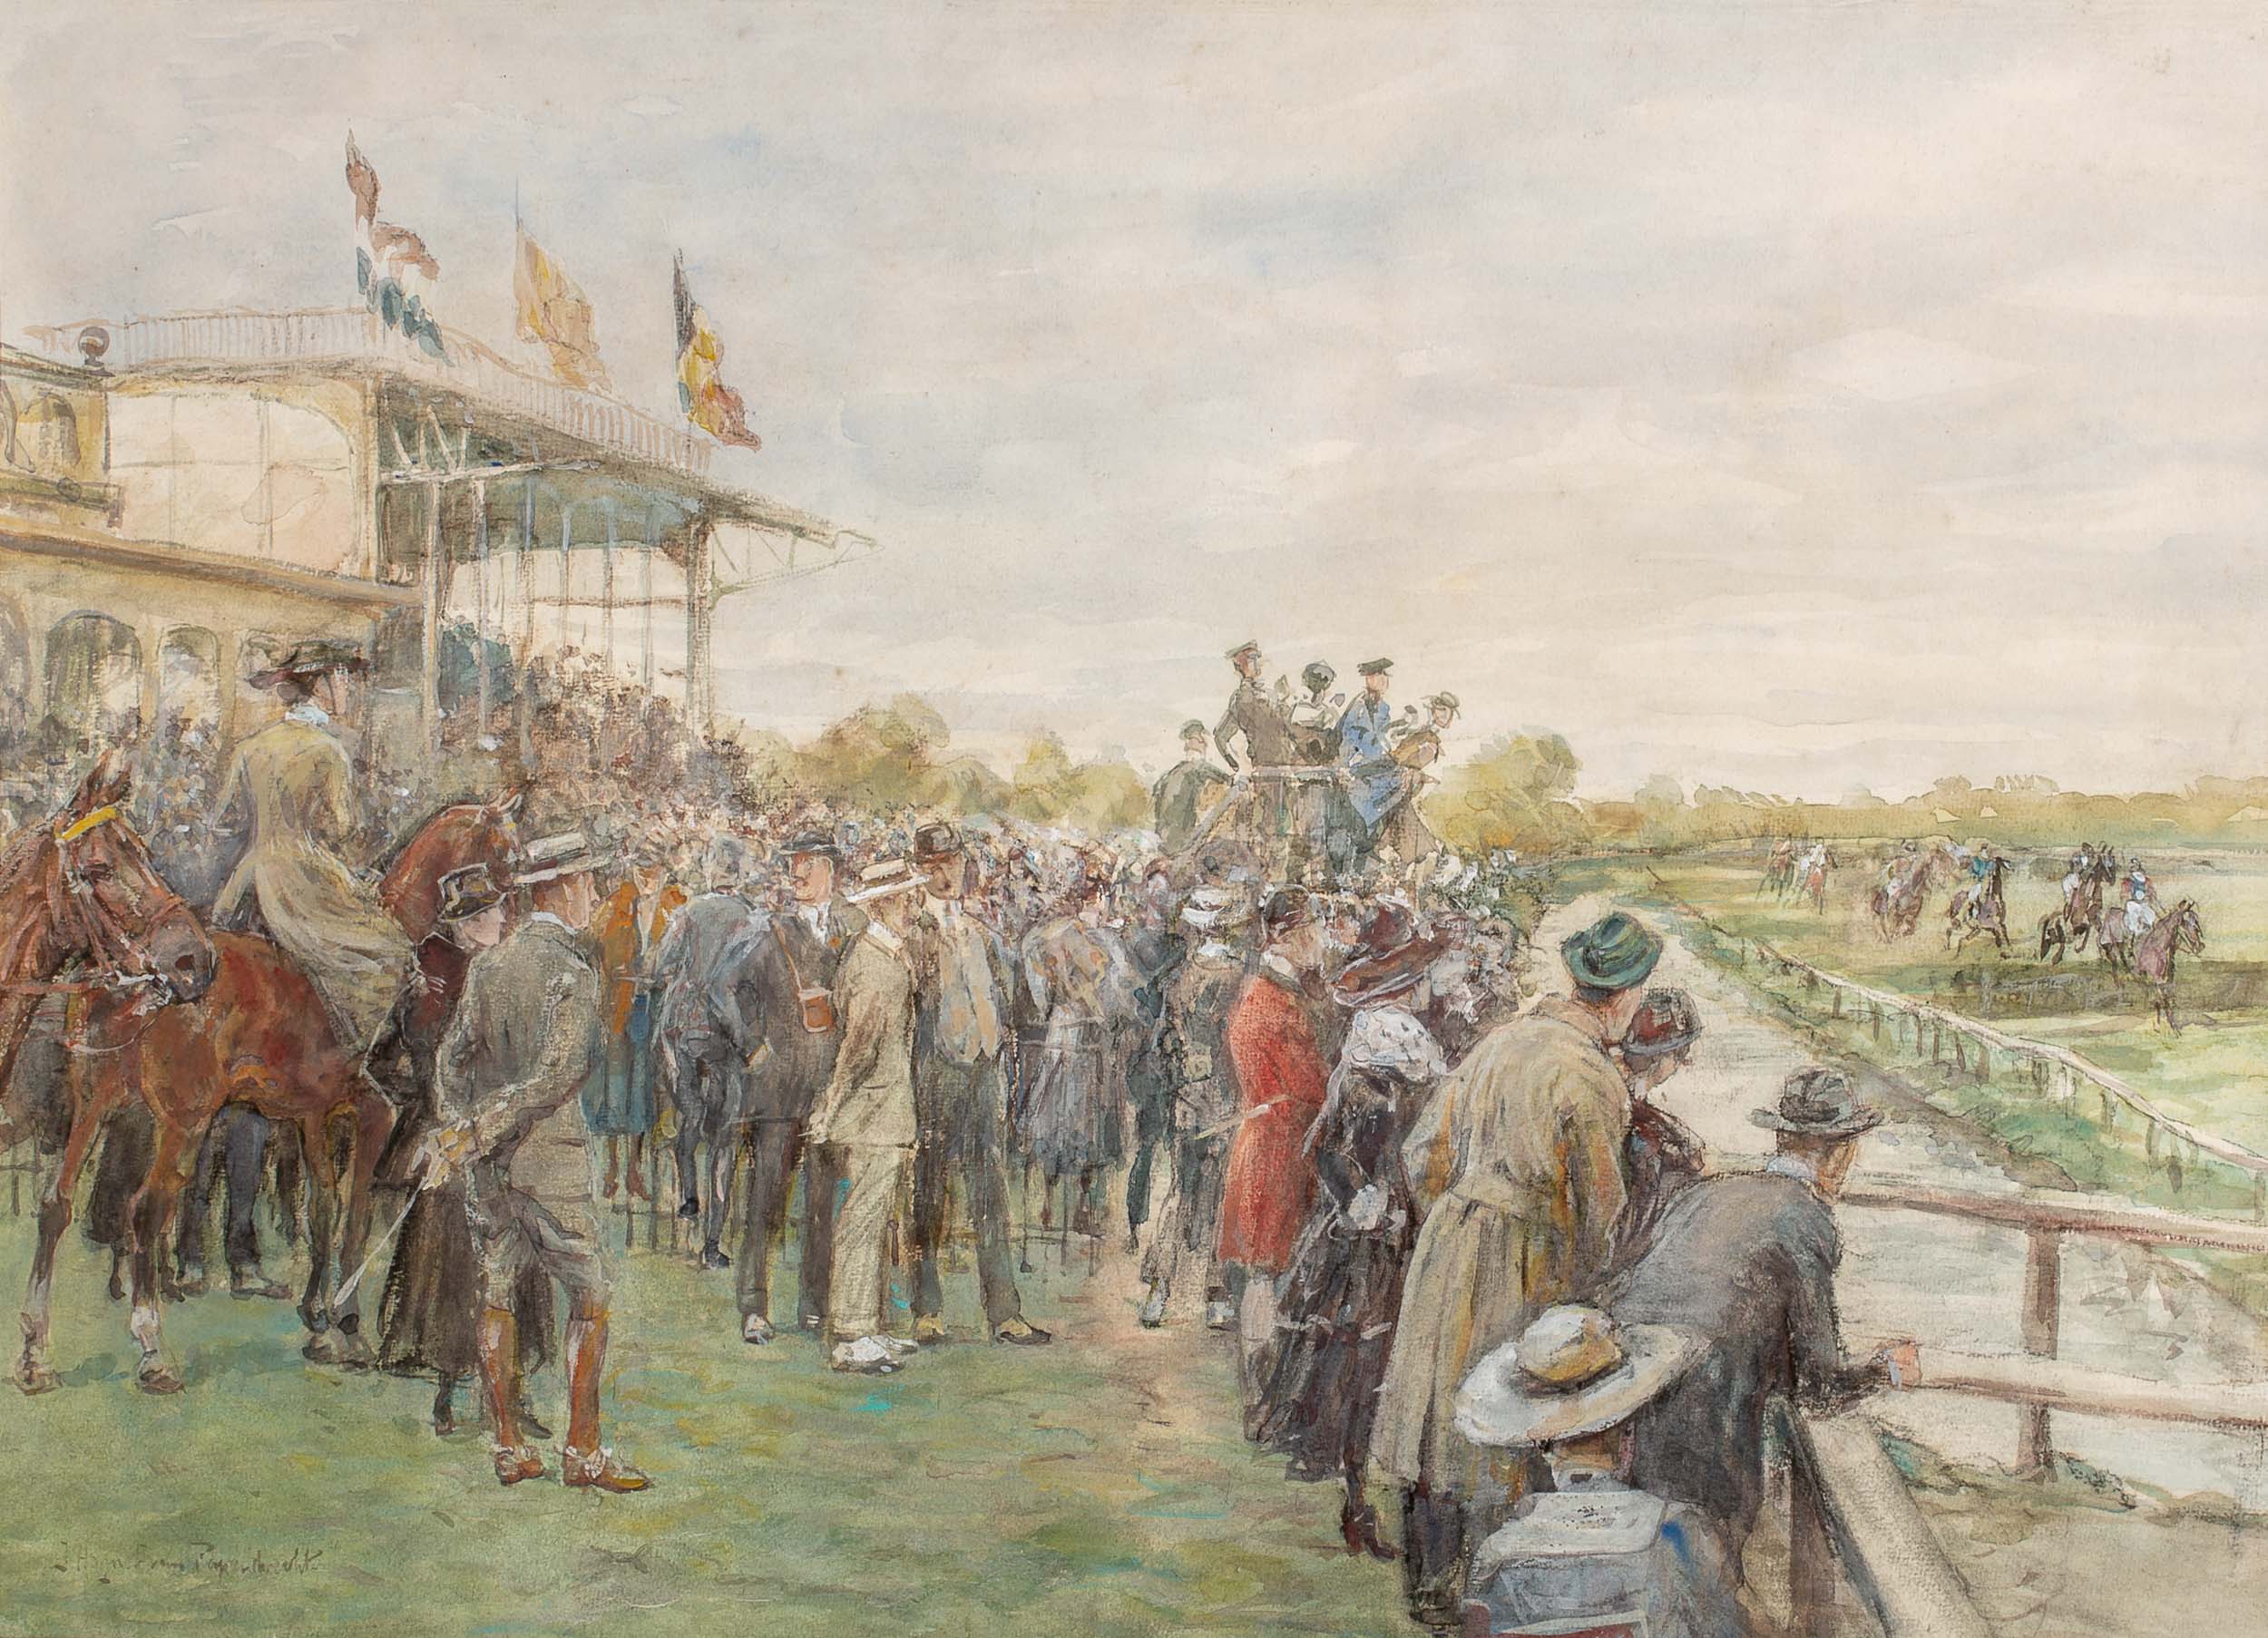 The horse race, Duindigt